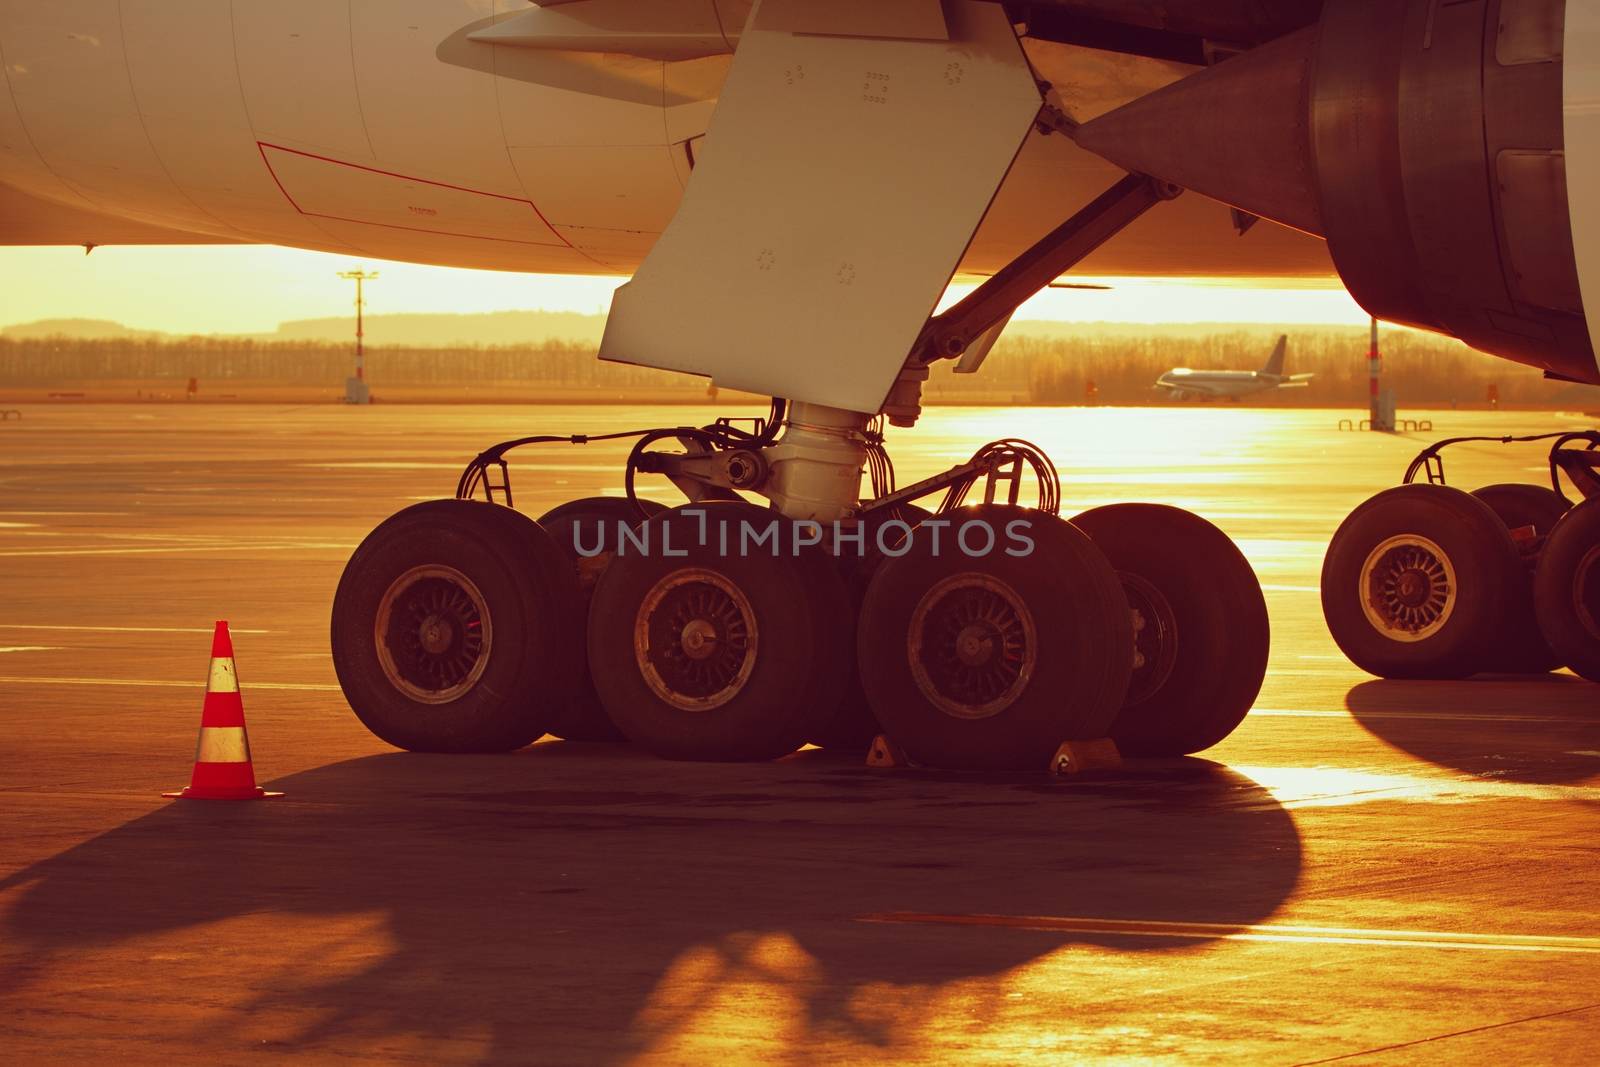 Undercarriage of the huge airplane at the sunset